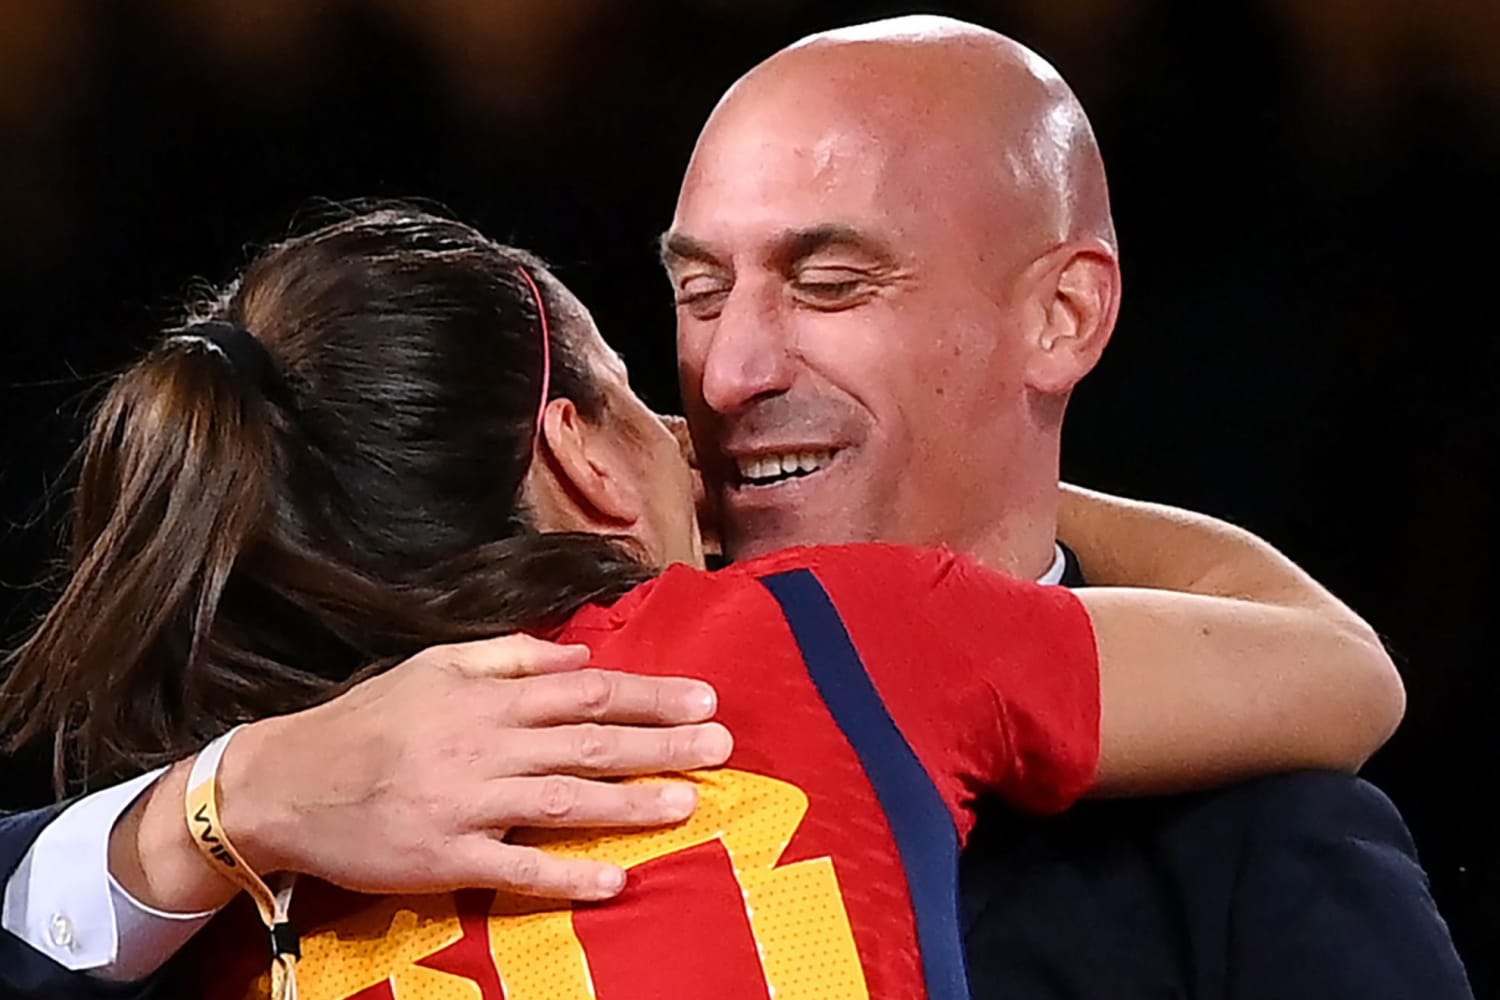 Spains soccer federation stands by its chief amid uproar over kiss